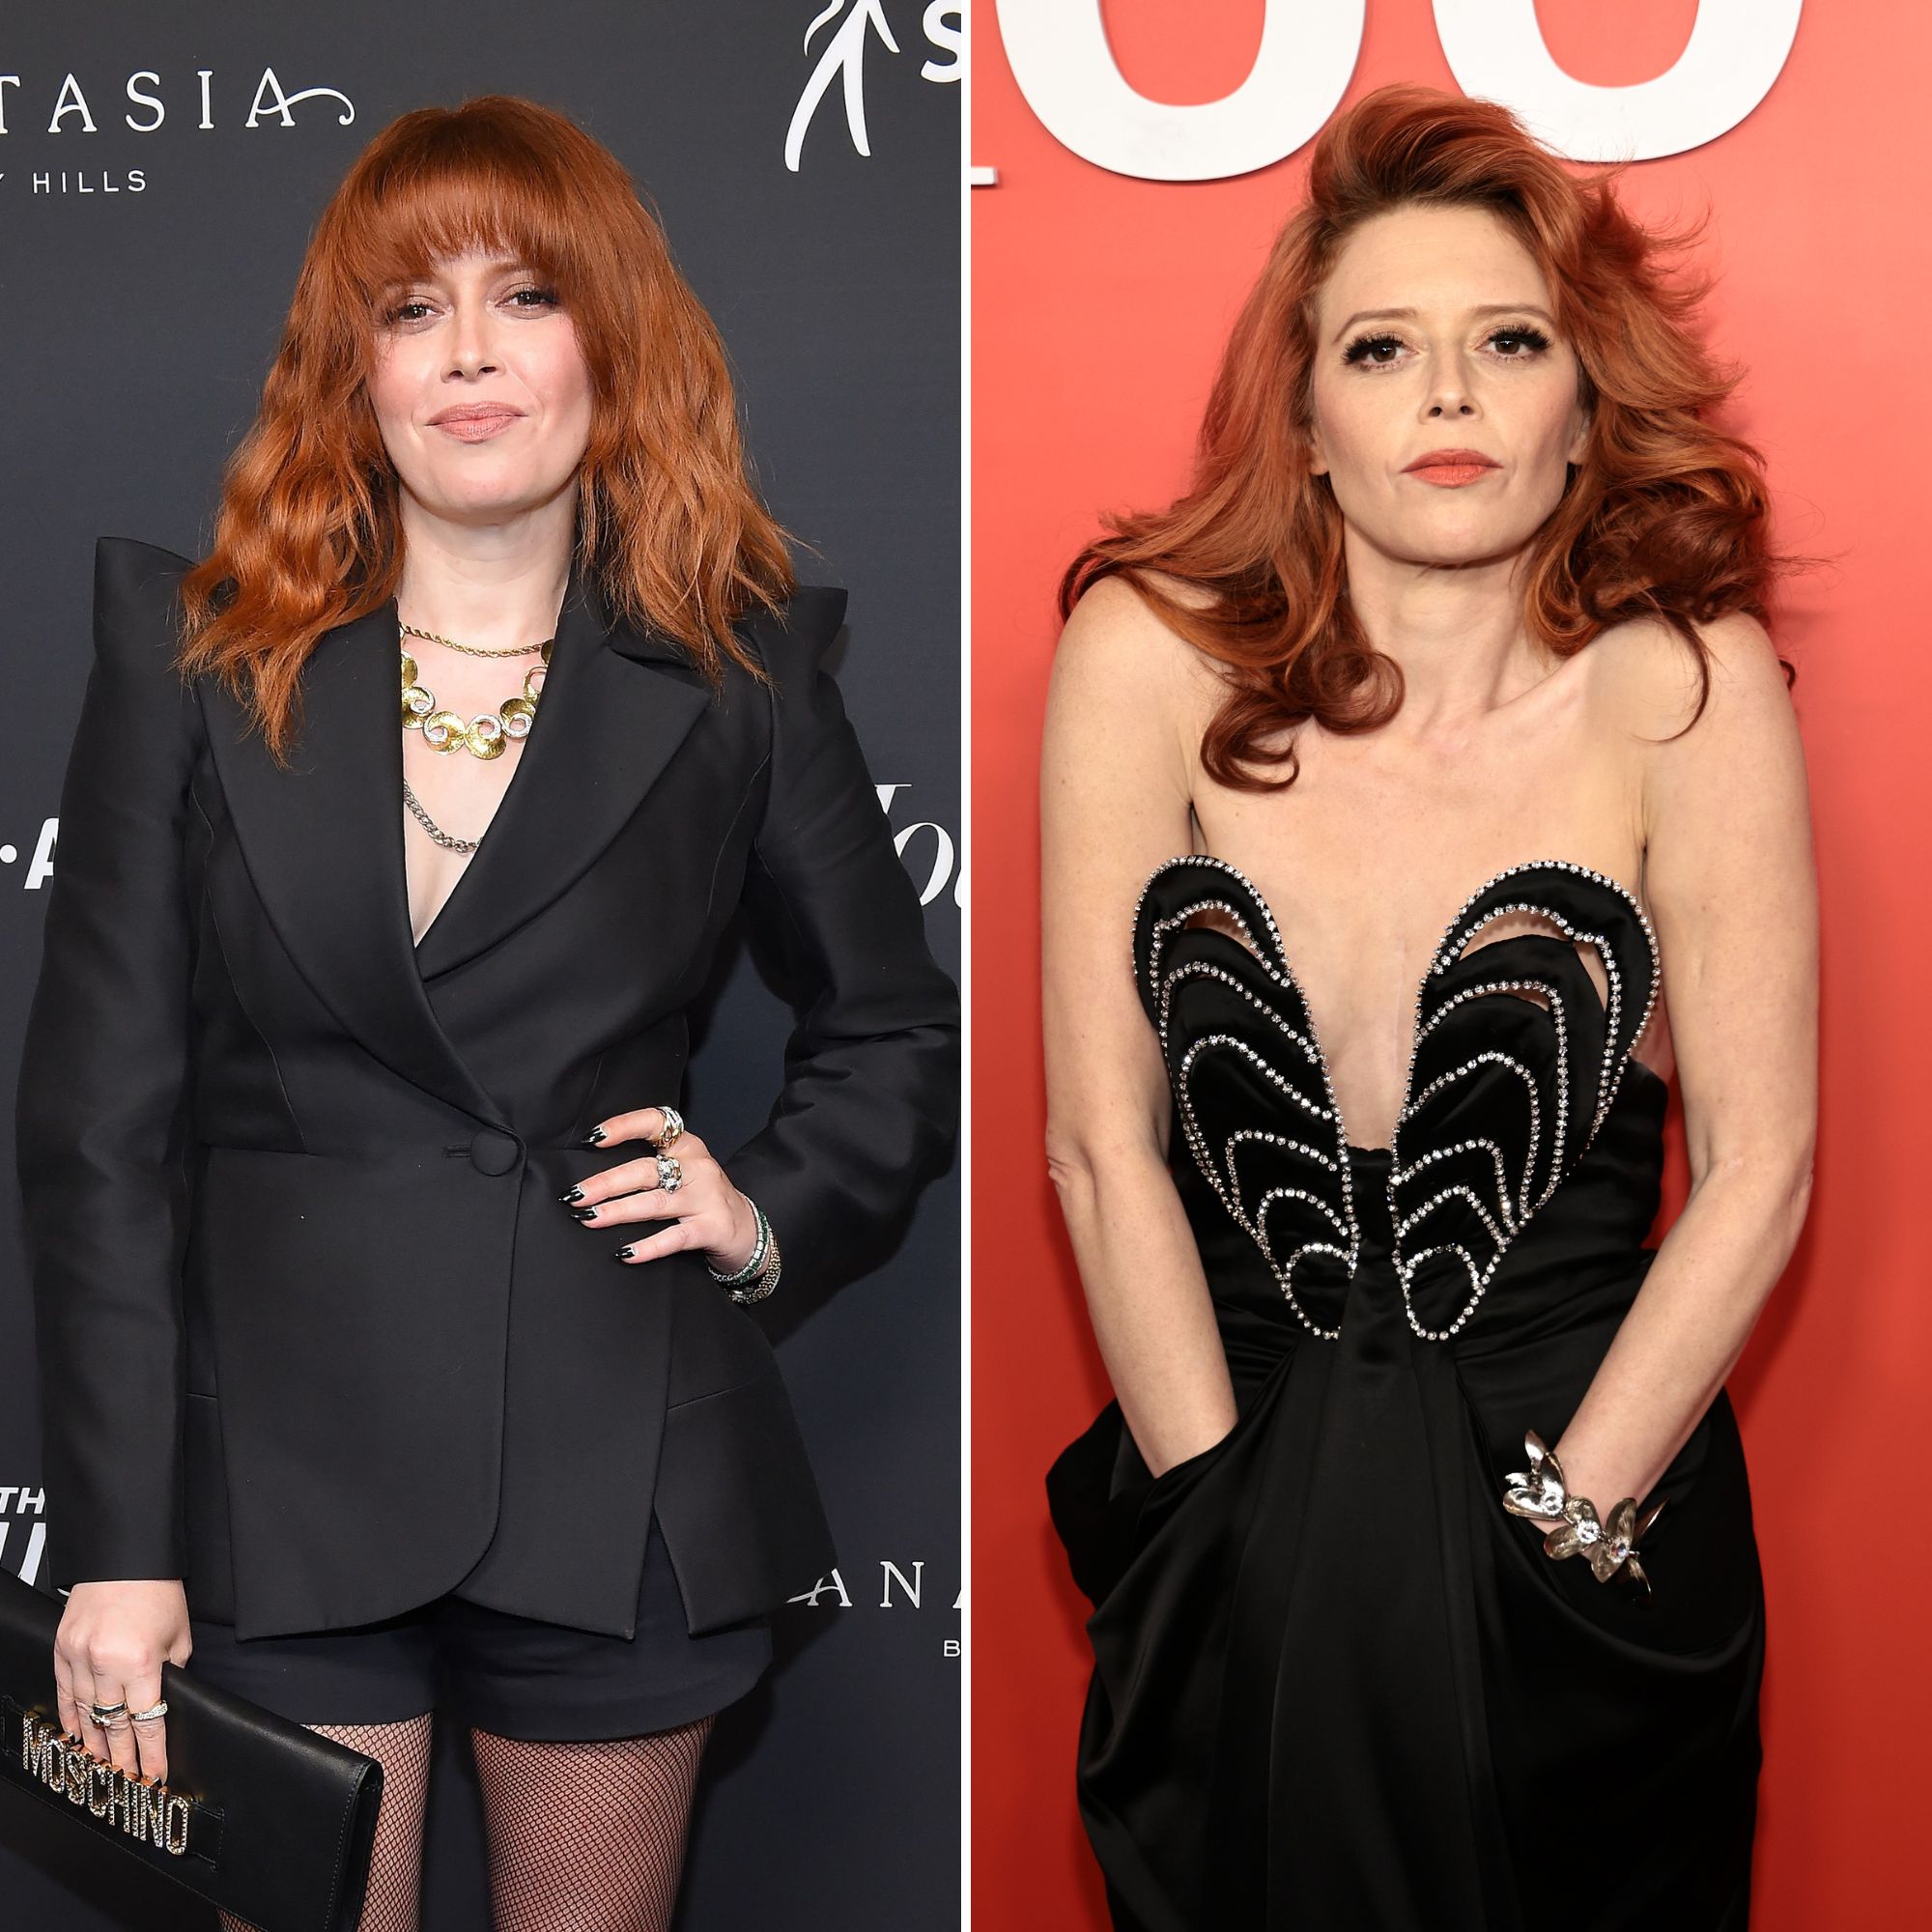 Rhinoplasty: Has Natasha Lyonne Done a Nose Job And Plastic Surgery? Before And After | Life ...